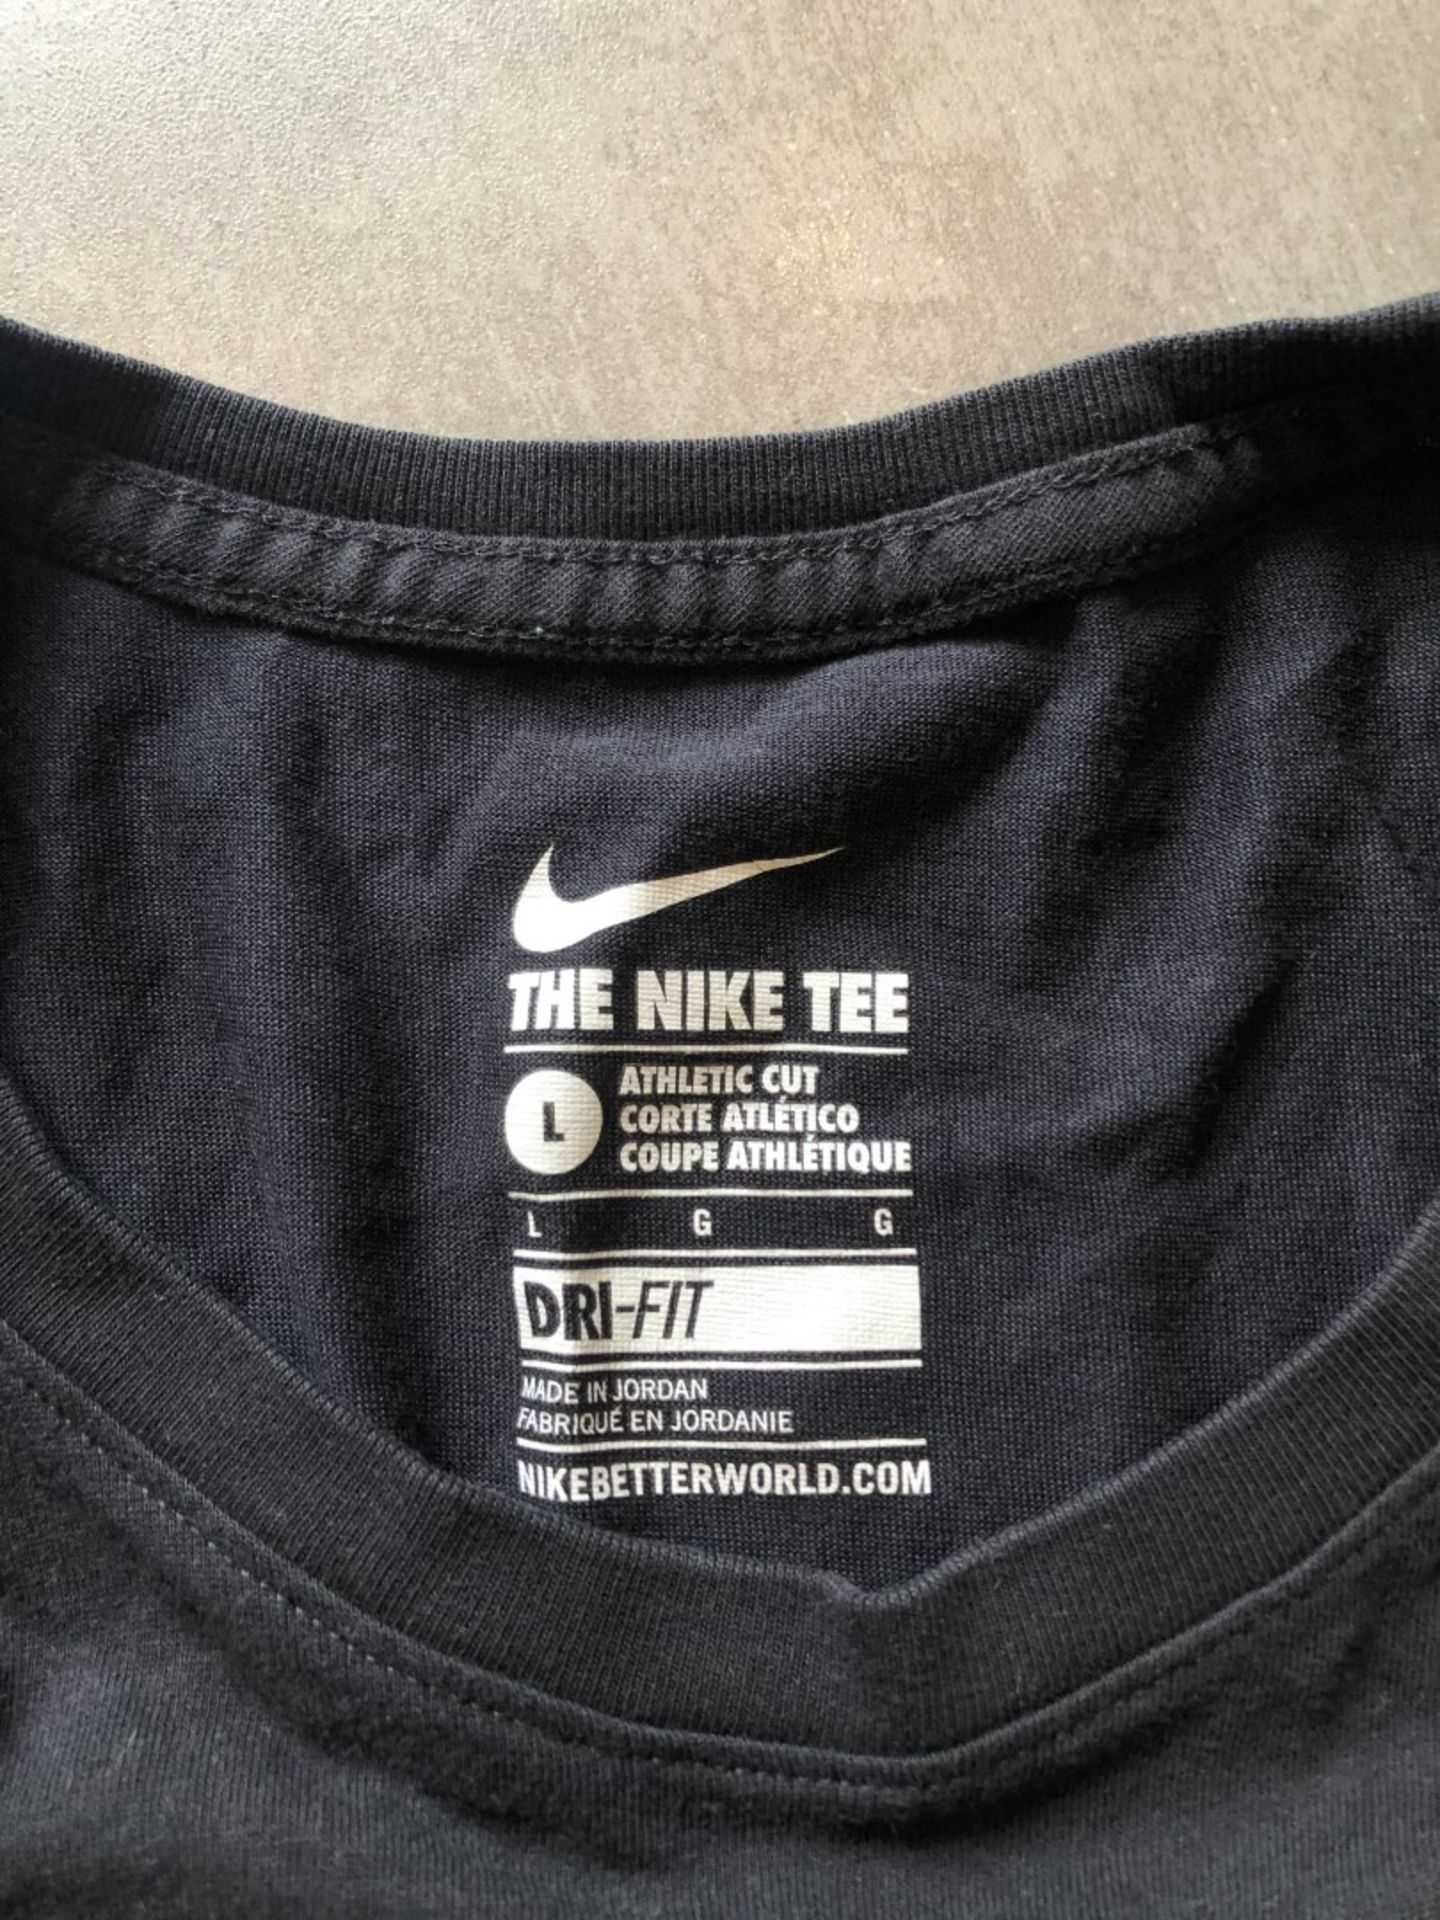 1 x Men's Genuine Nike Dri-Fit T-Shirt In Black With The Slogan "Equality" - Size (EU/UK): L/L - - Image 7 of 10